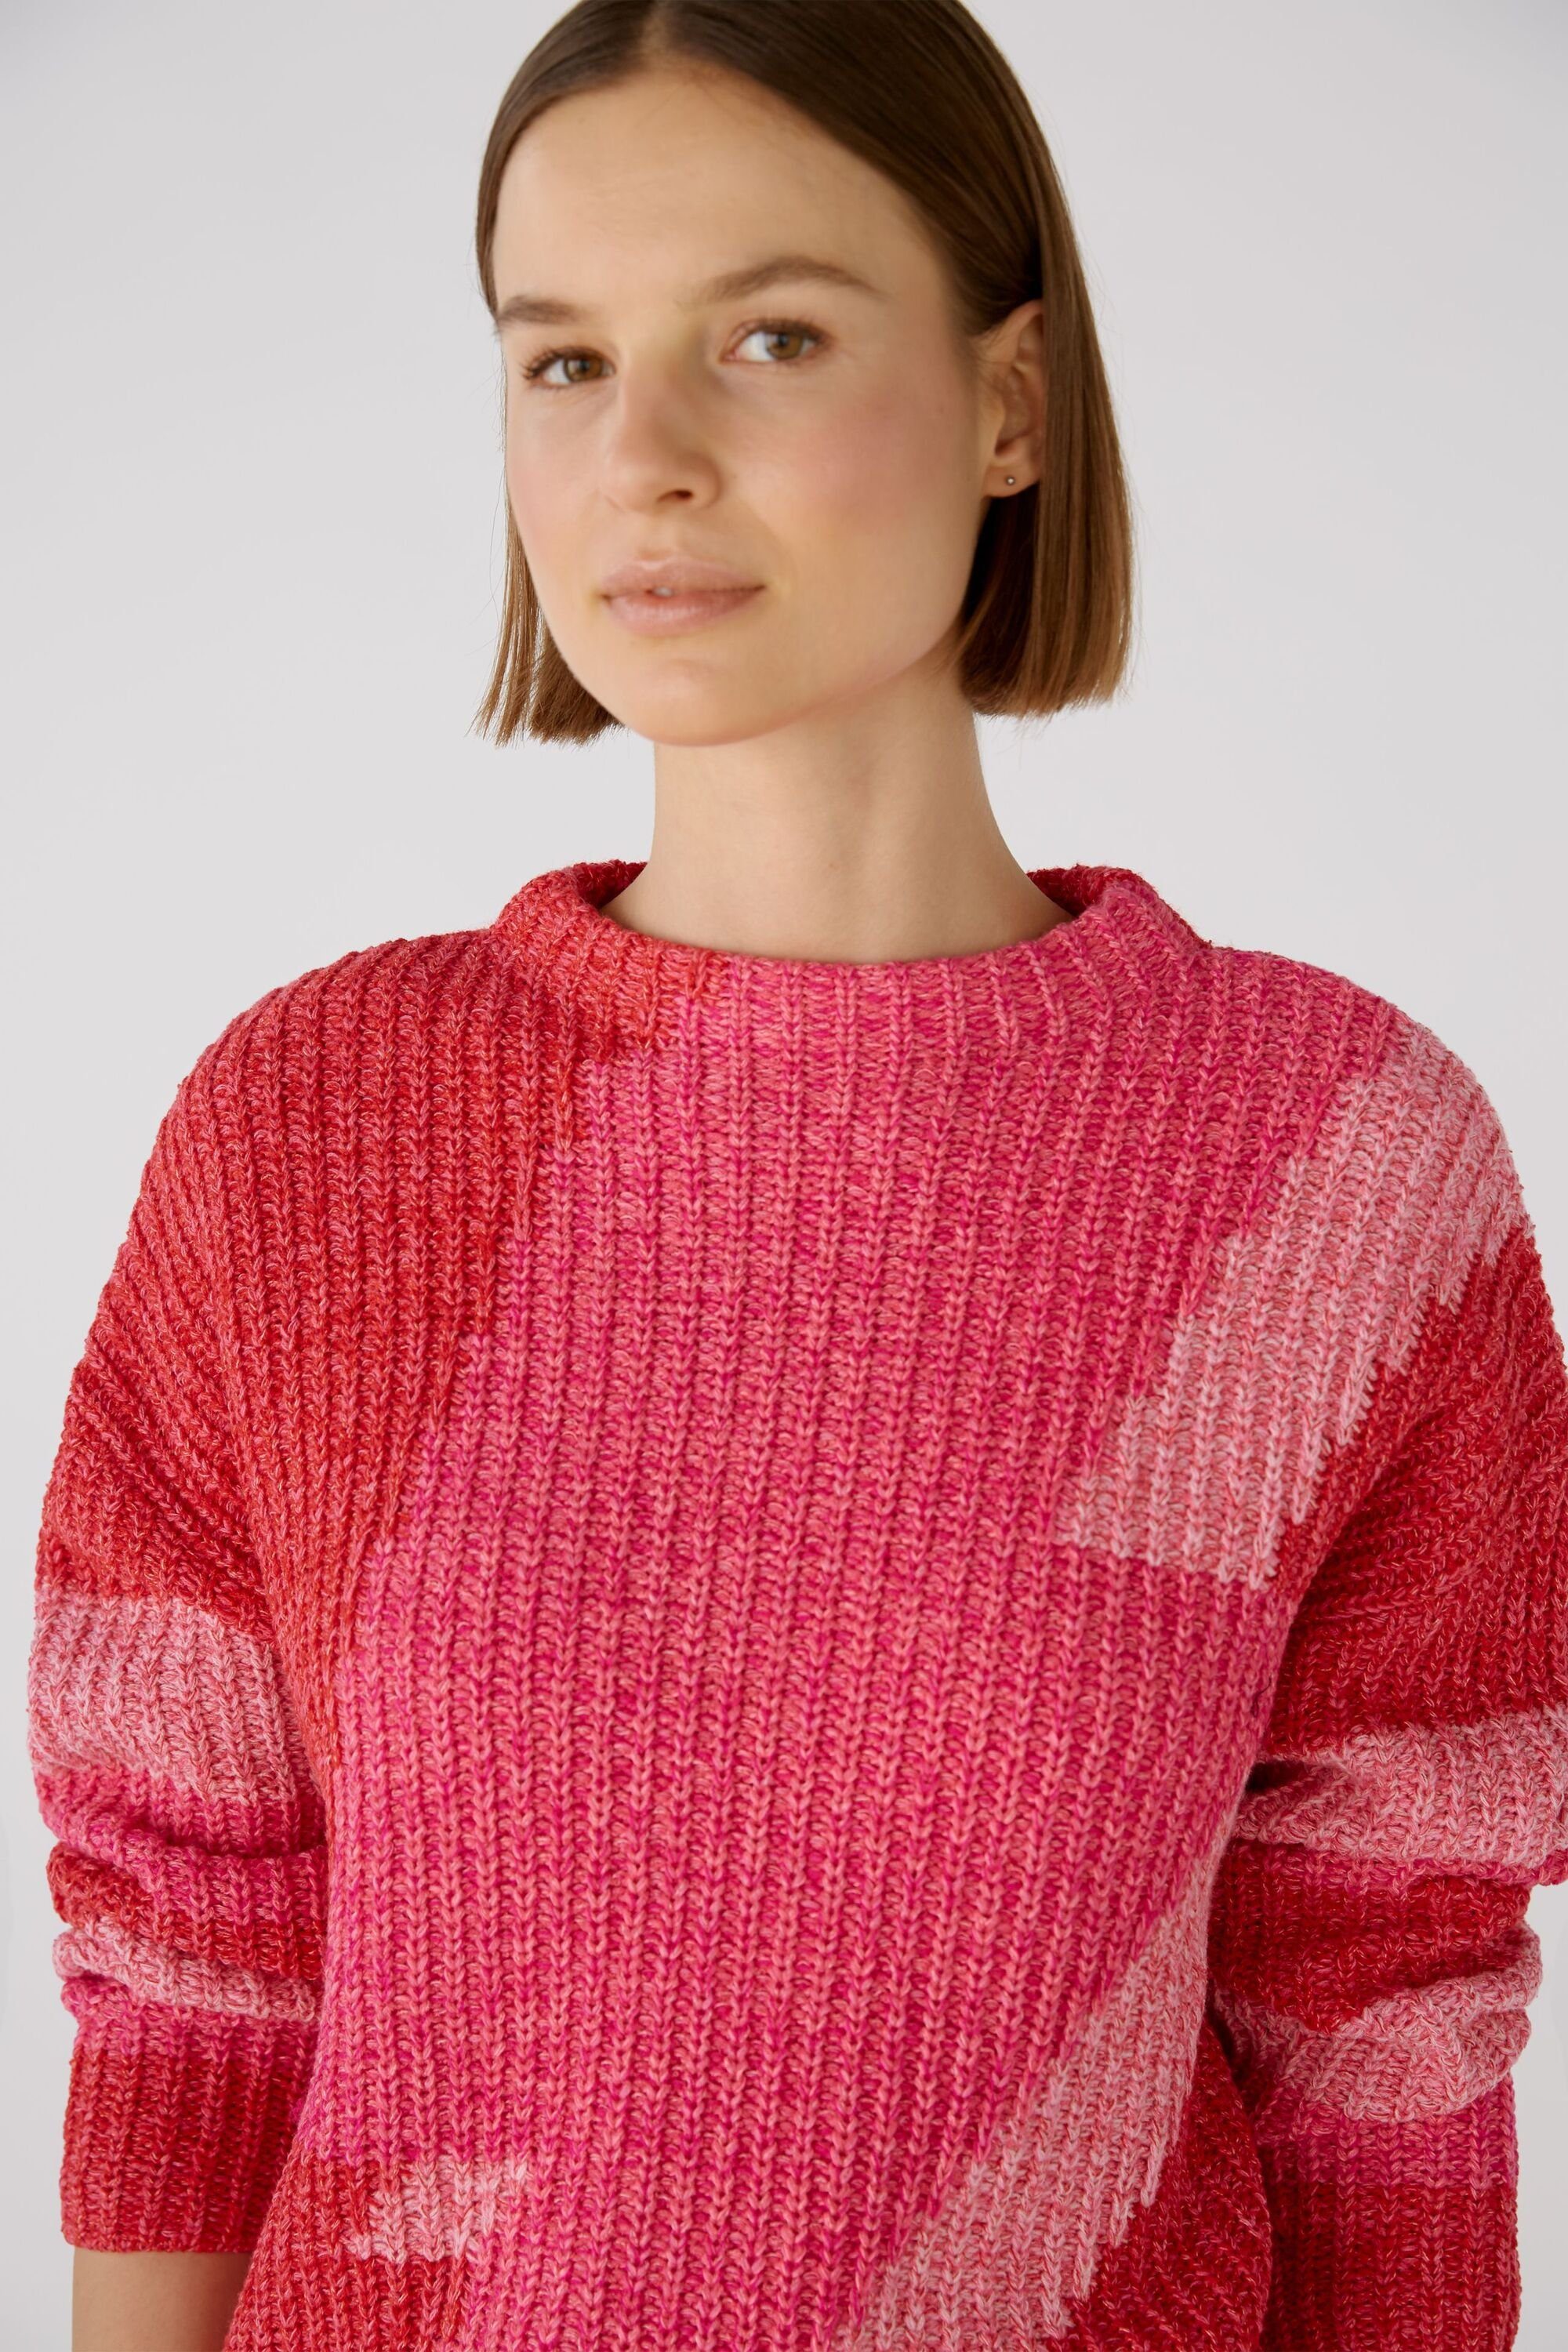 Strickpullover Oui Oui Set rot Pullover Baumwollmischung